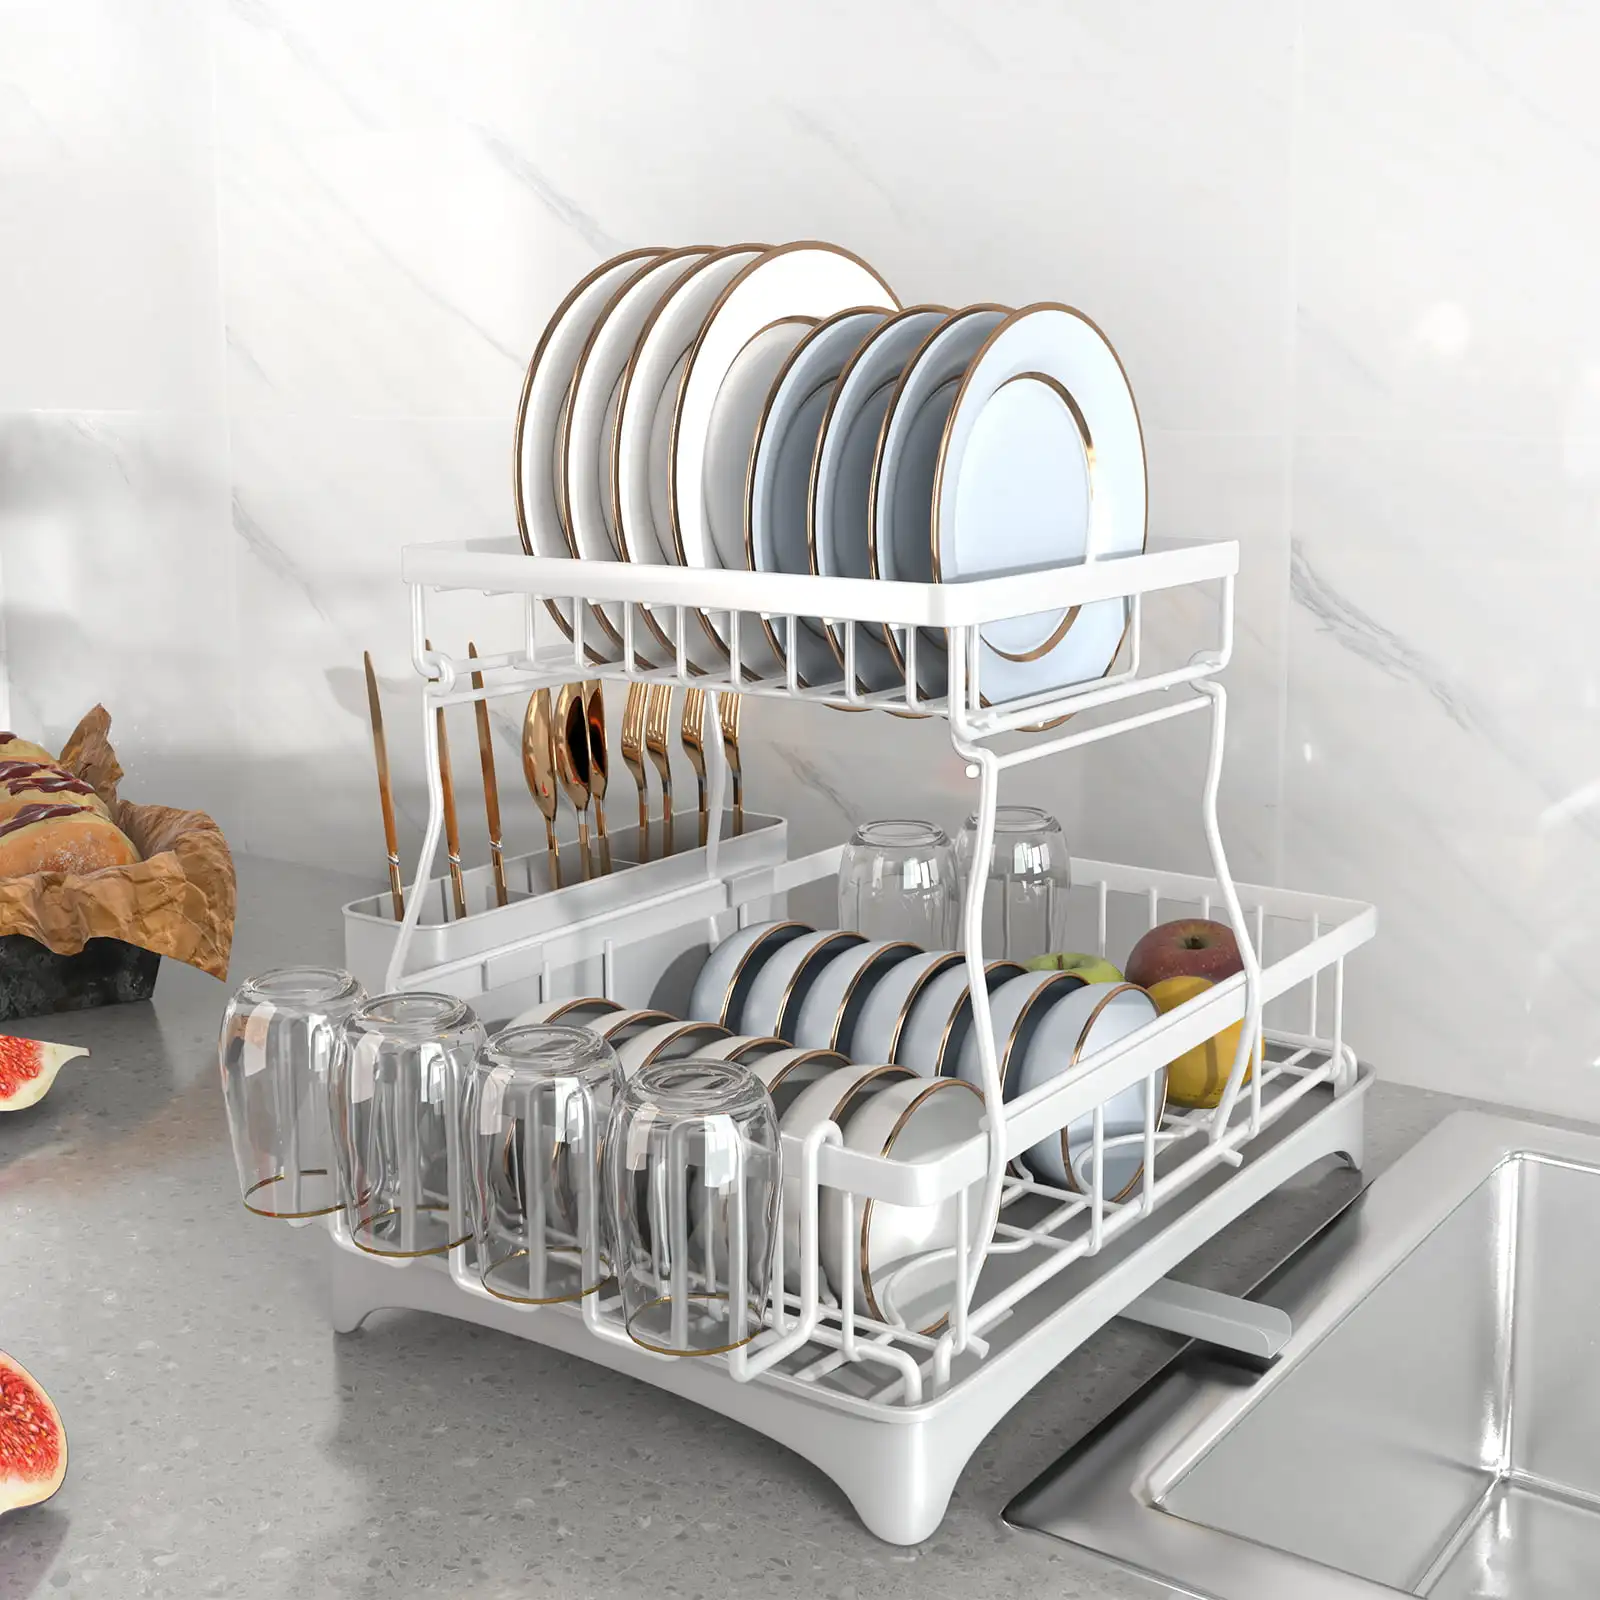 

2-Tier Large Drying Dish Rack Set, Stainless Steel Dish Racks with Drainage,Dish Drainers for Kitchen Counter